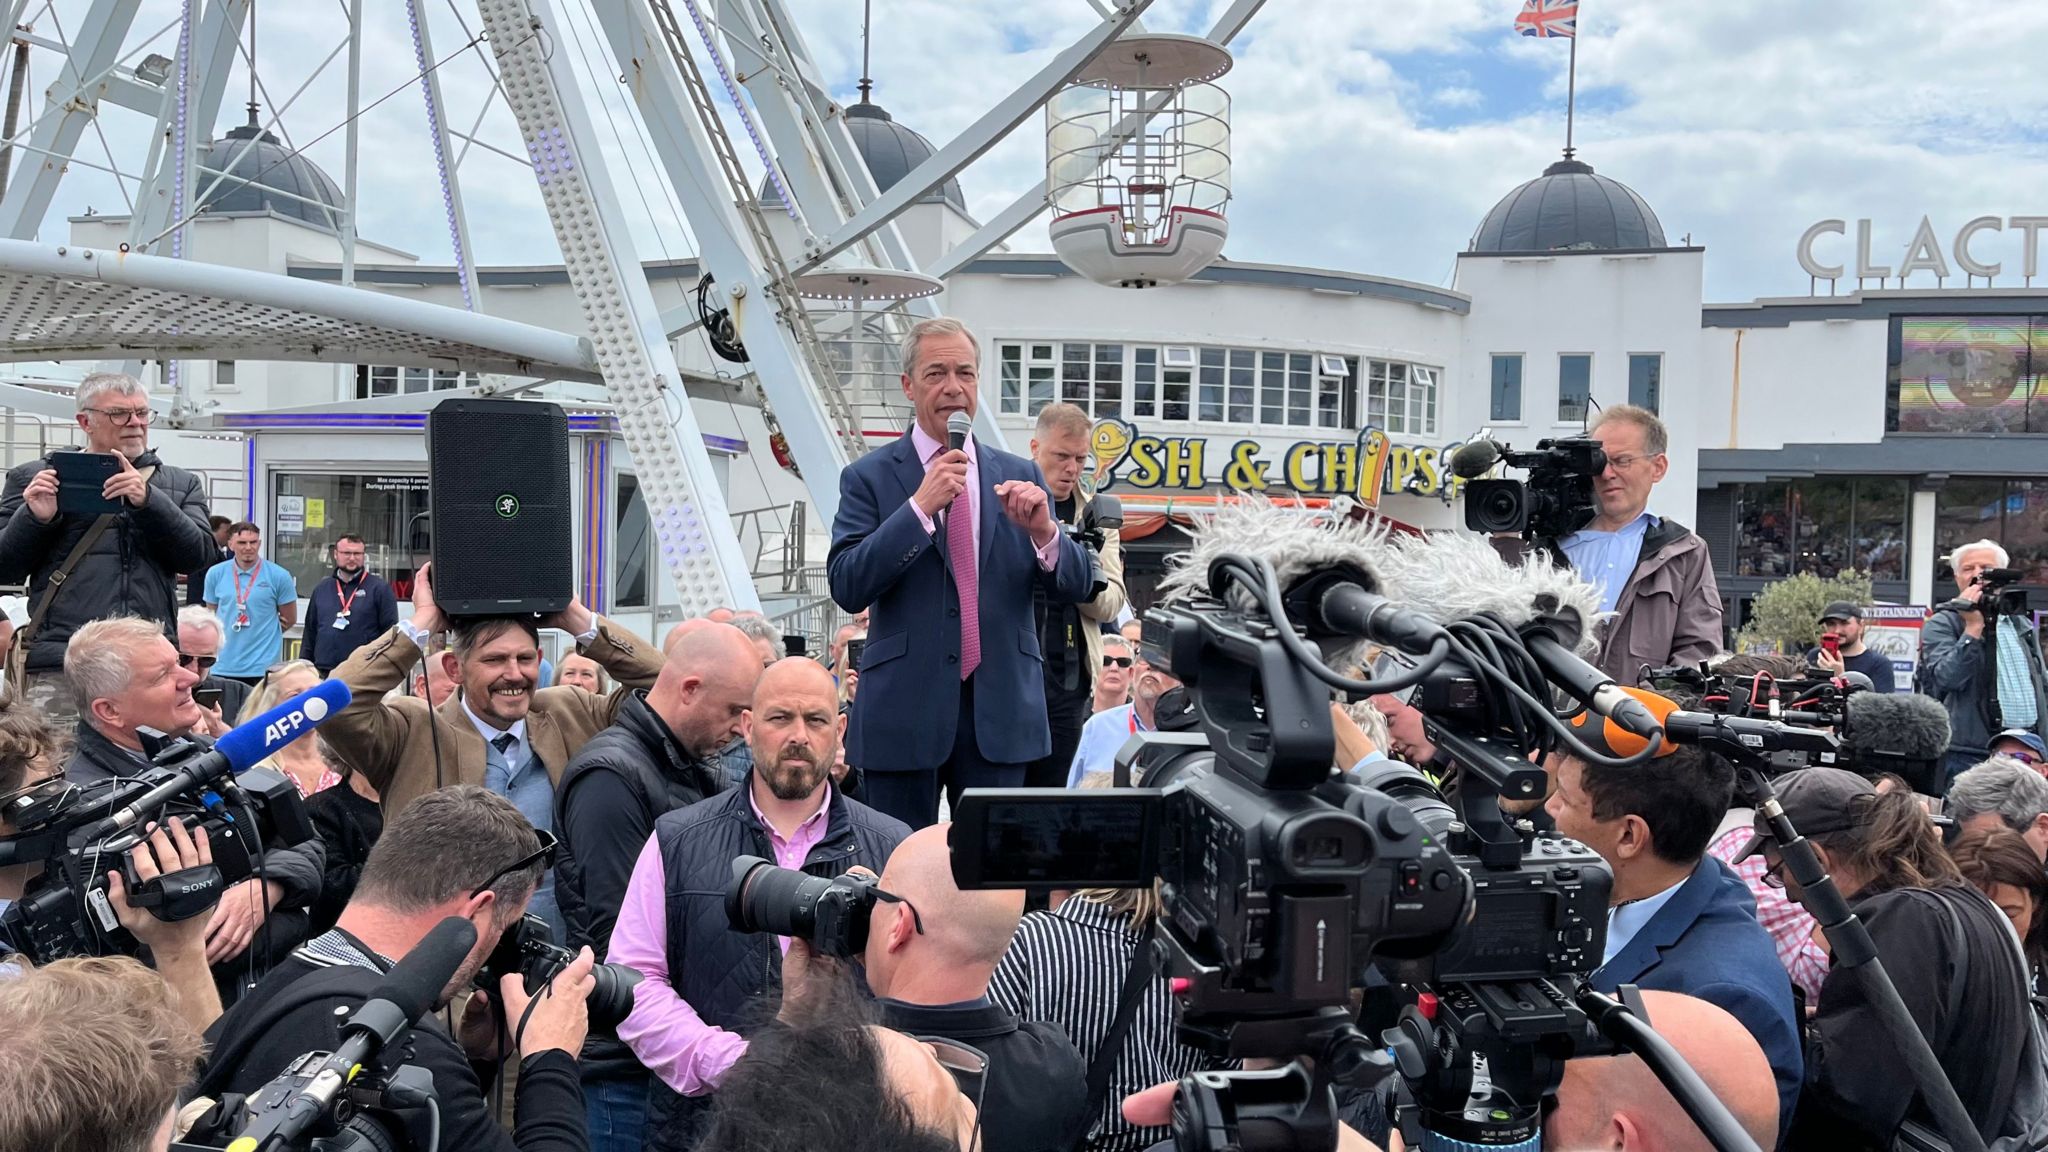 Nigel Farage talking to crowds with a microphone at Clacton Pier